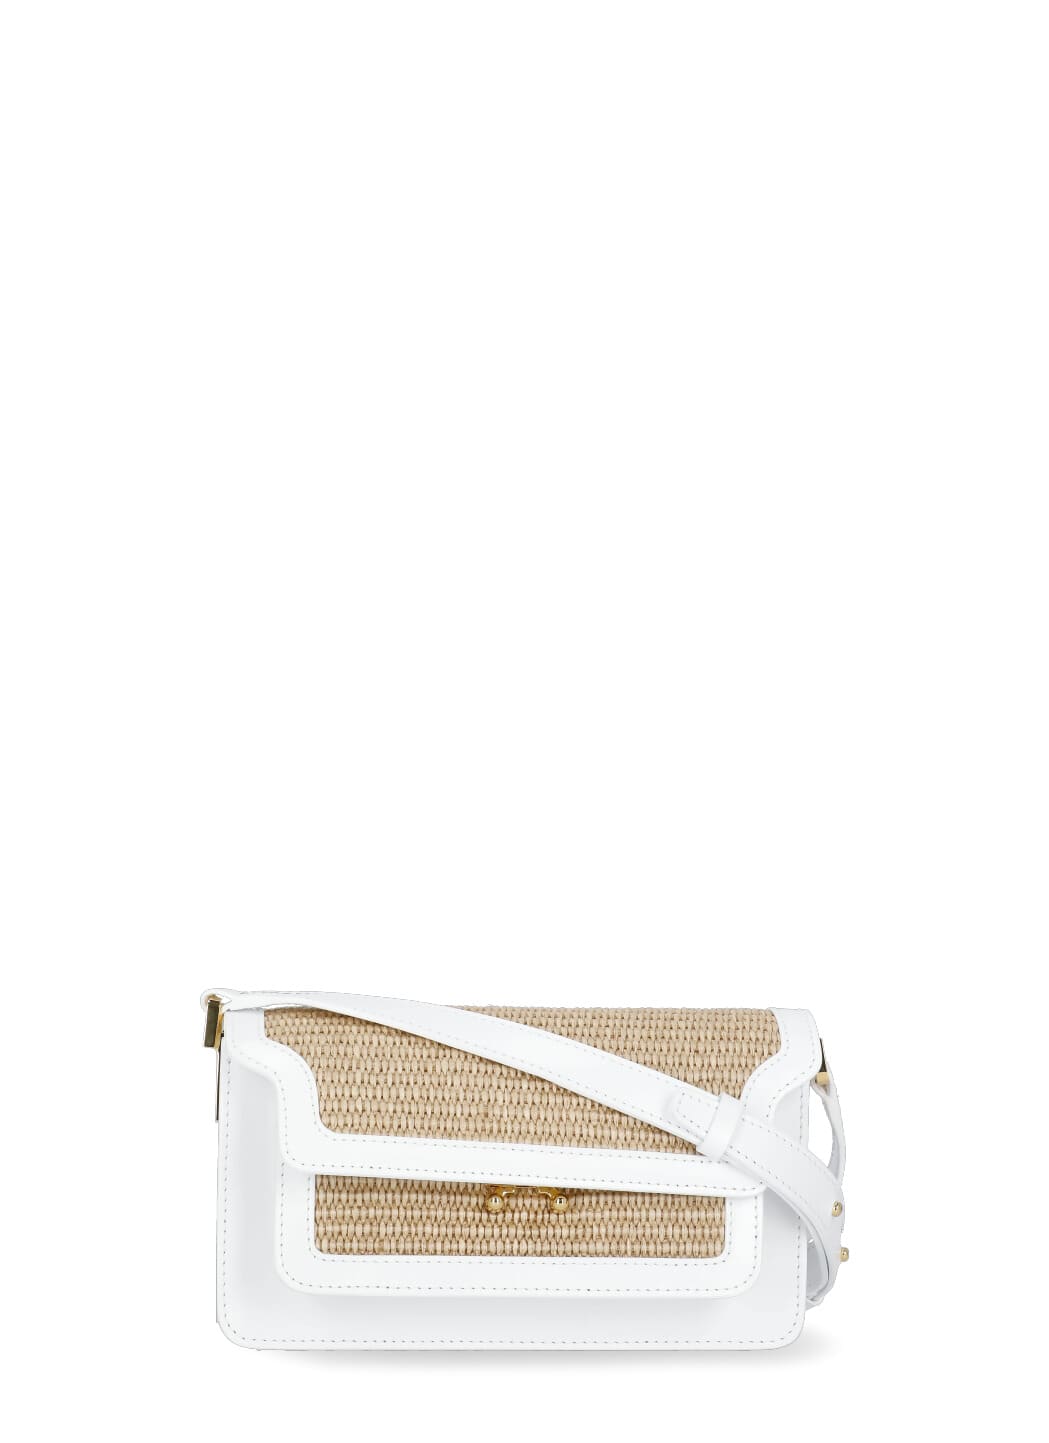 Marni Trunk Soft EW Shoulder Bag in Sand Storm/Lily White – Hampden Clothing